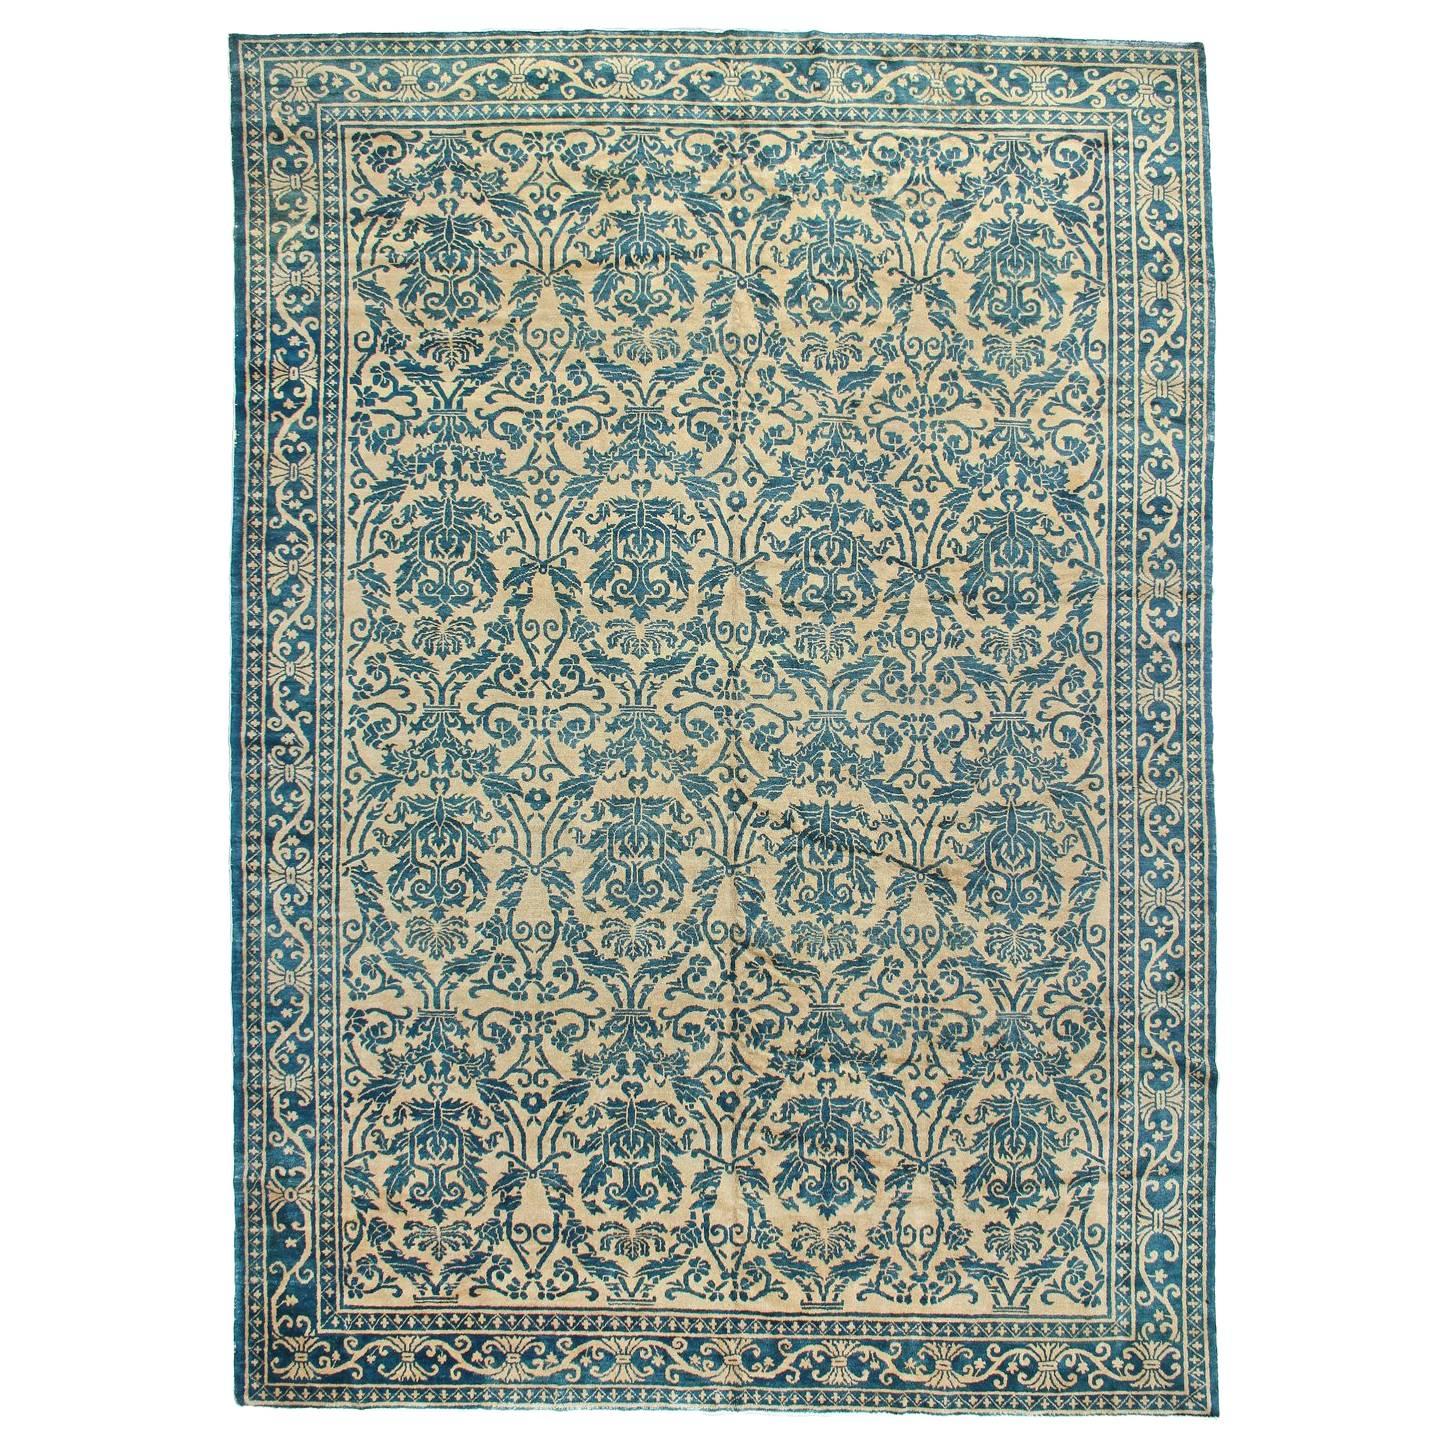 Peking Chinese Rug, Classic Hispano-Moresque Design, First Quarter 20th Century For Sale